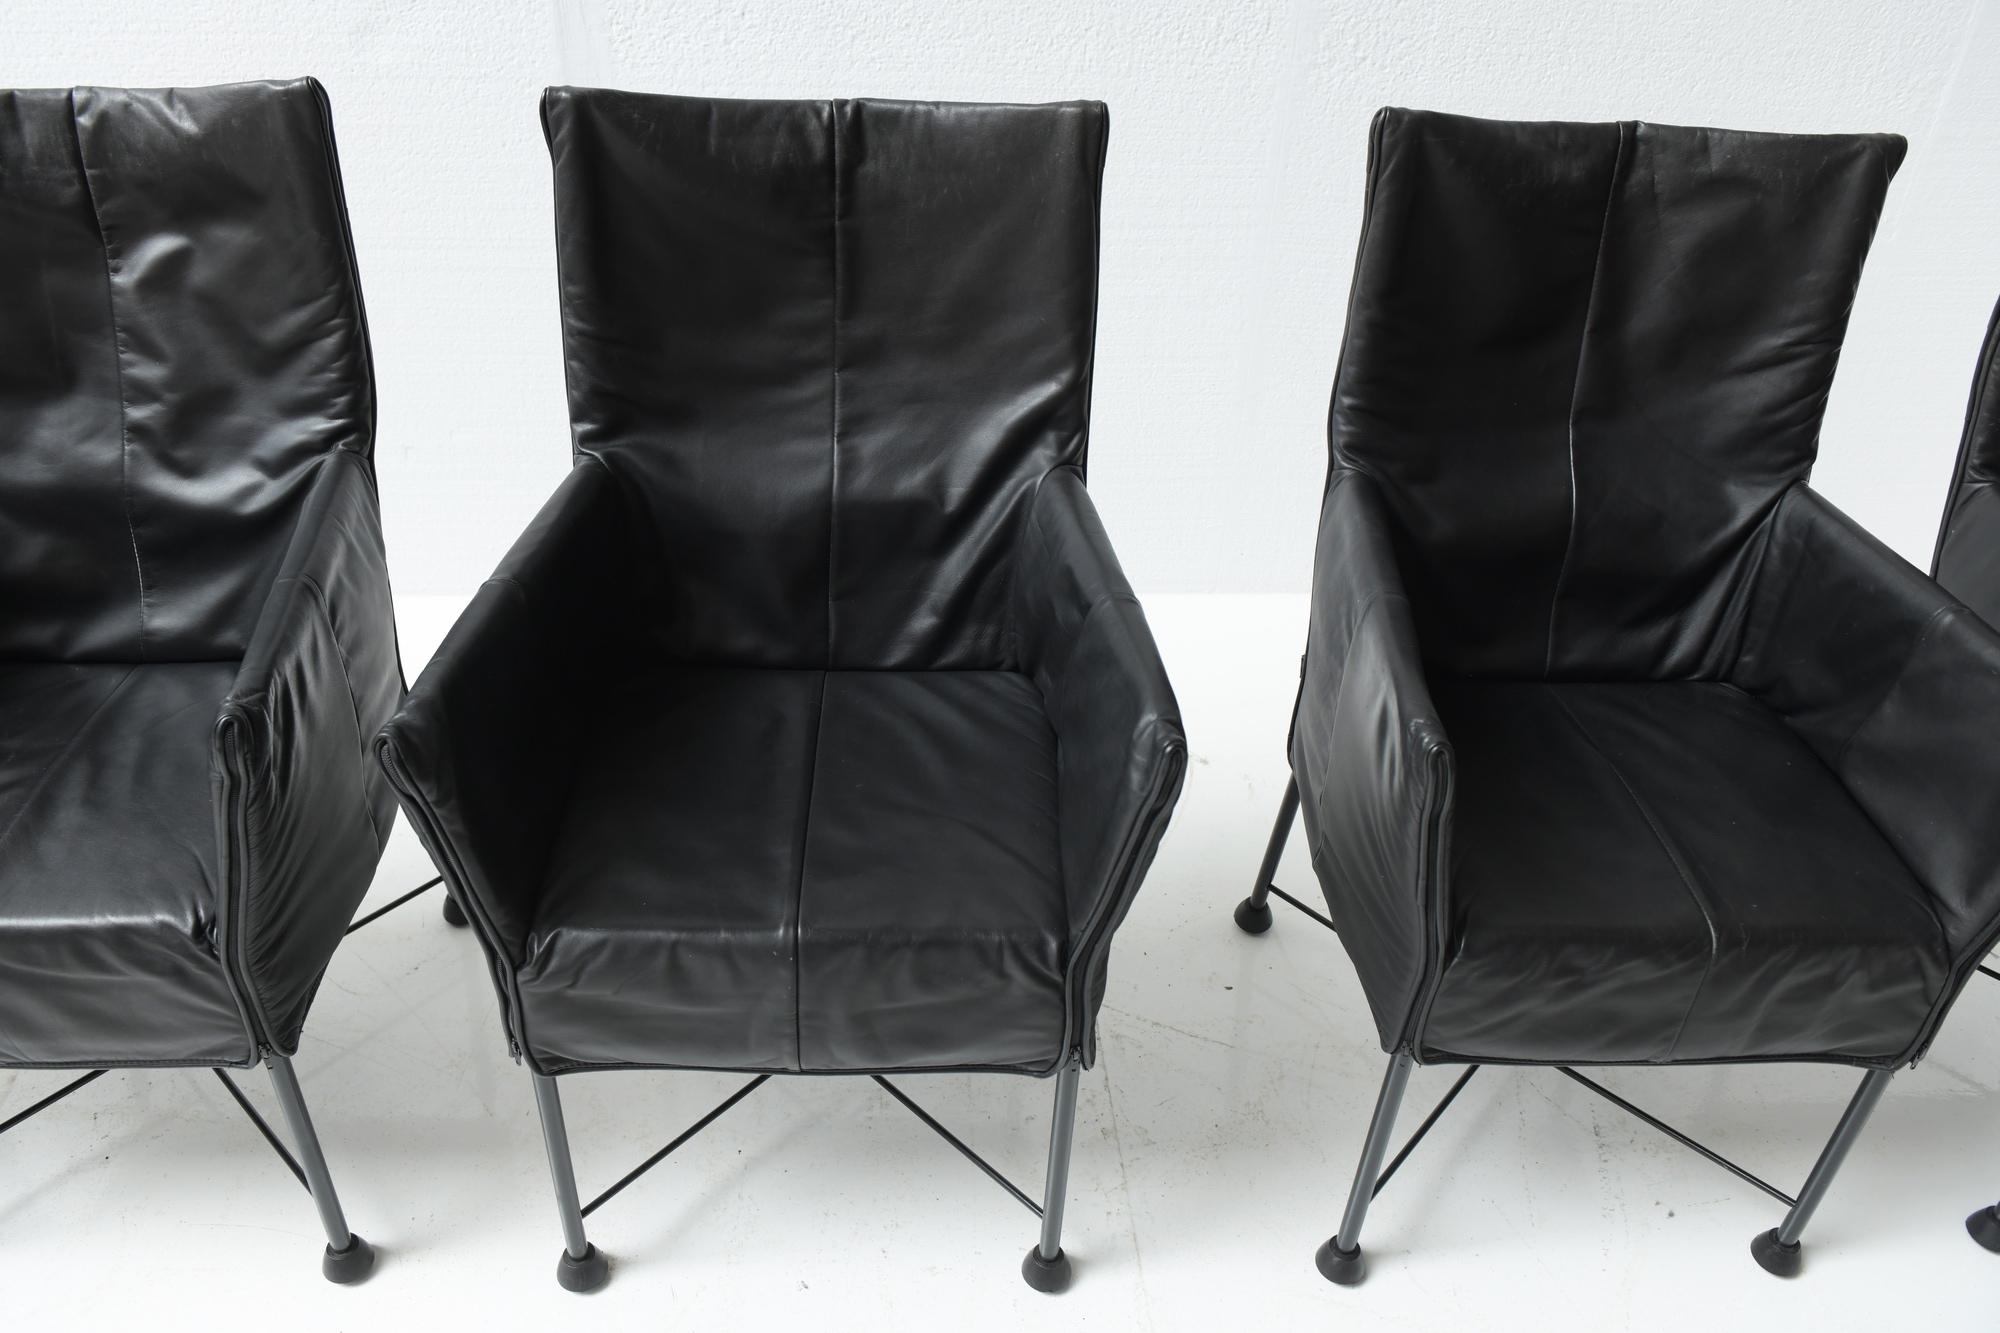 6 x Chaplin Vintage Leather Dining Chairs by Gerard van den Berg for Montis For Sale 7